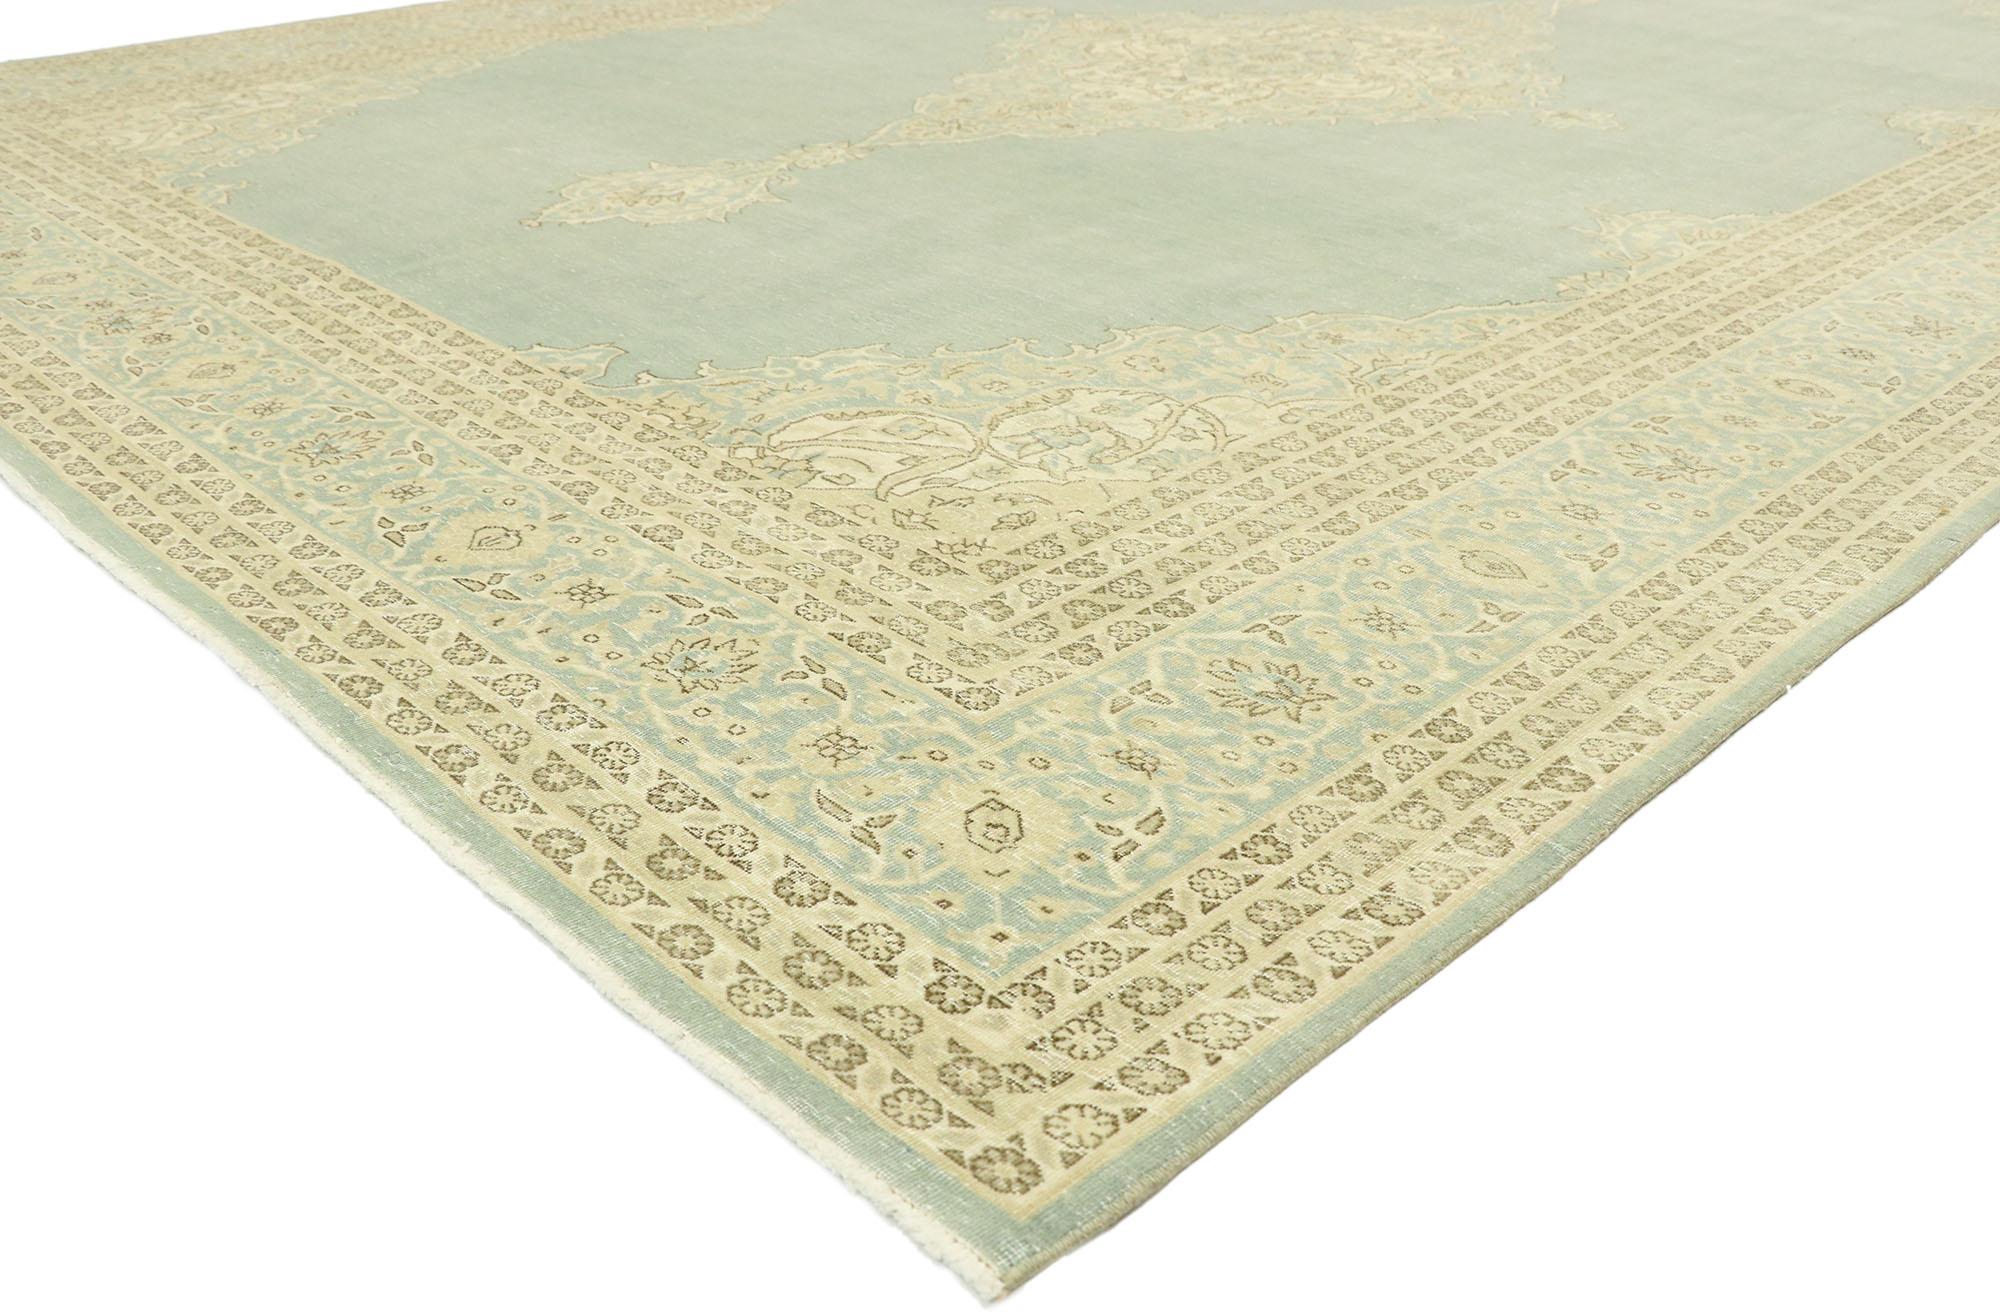 52976 Muted Vintage Turkish Sivas Rug, 09'00 x 12'08.
Timeless style meets Gustavian grace in this hand knotted vintage Turkish Sivas rug. The intricate botanical design and soft pastel colors woven into this piece work together creating an elegant